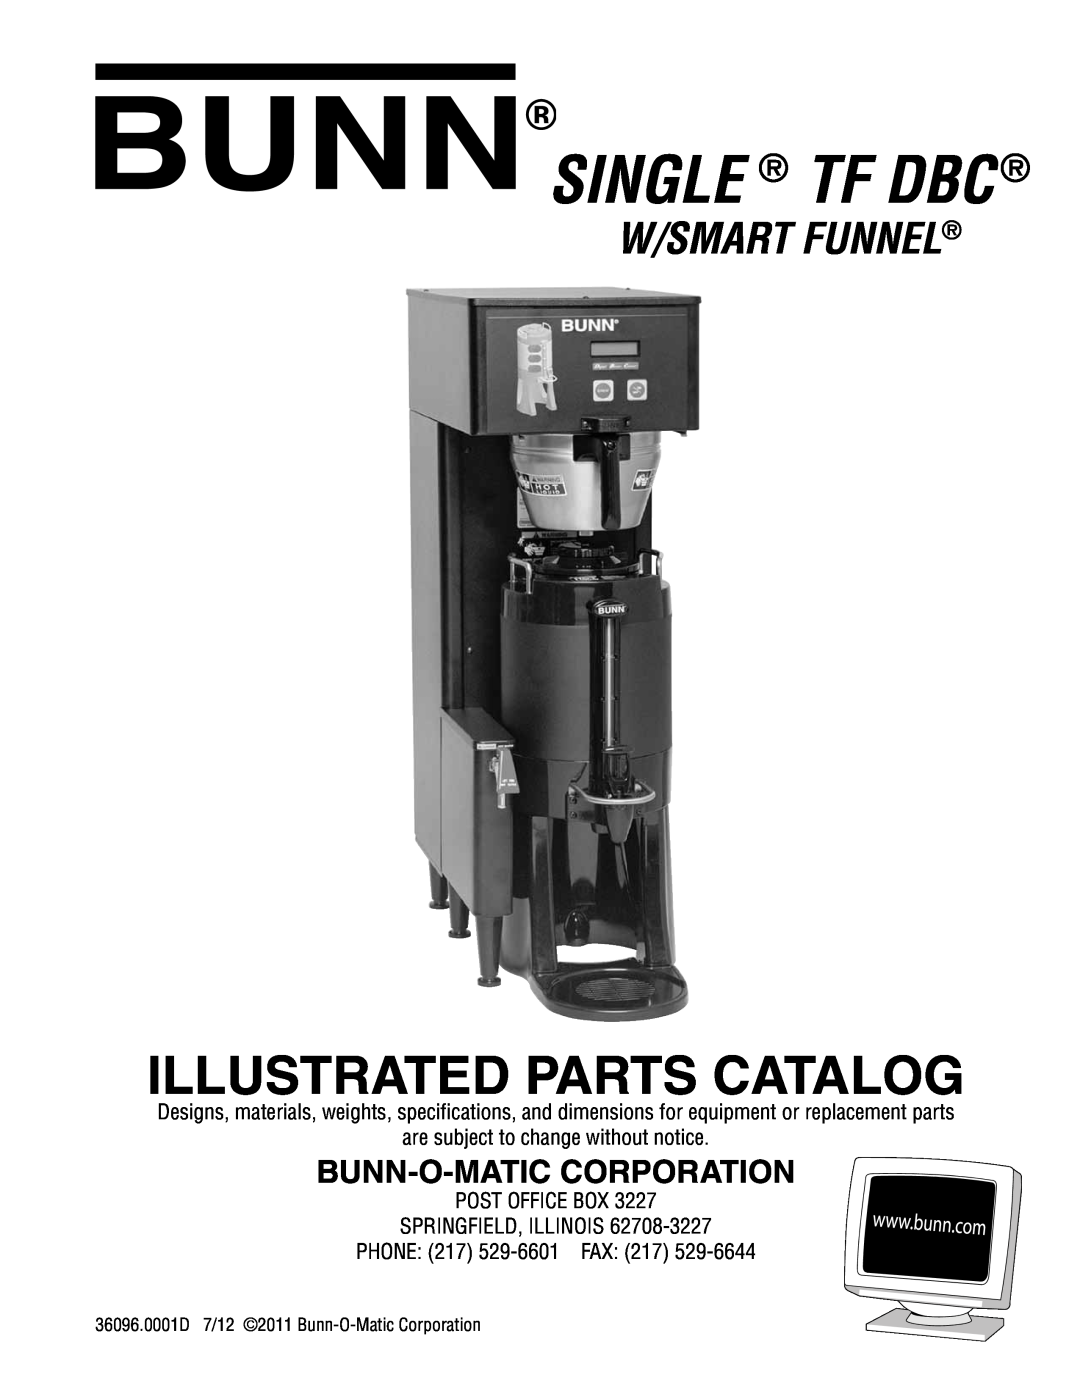 Bunn 360960001D specifications Bunn-O-Maticcorporation, are subject to change without notice, PHONE 217 529-6601FAX 